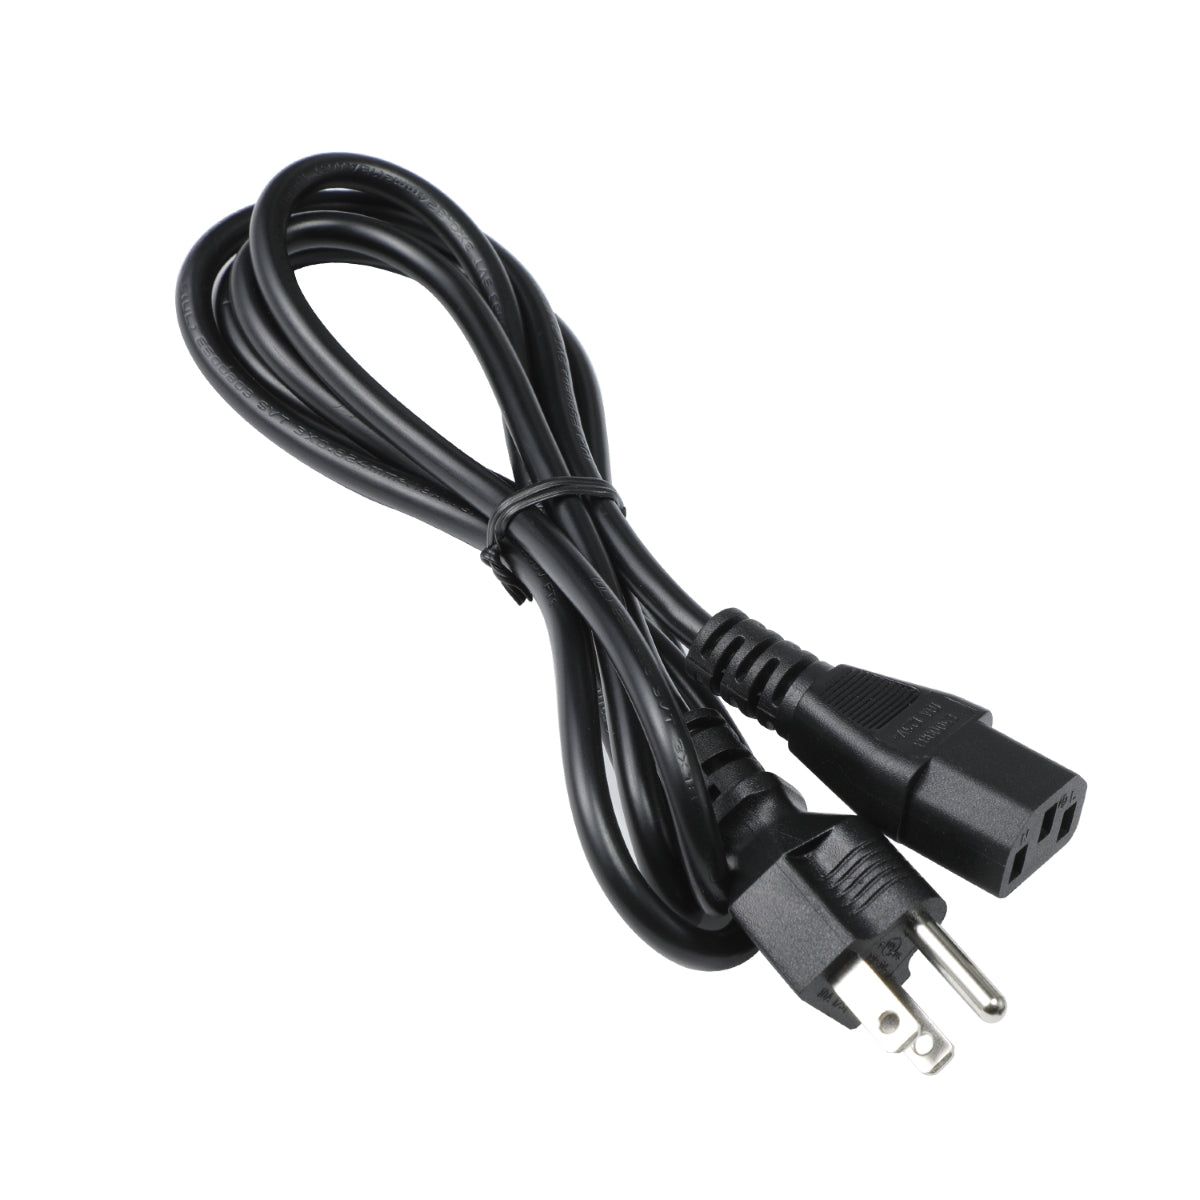 Power Cable for Philips 346B1C Monitor.